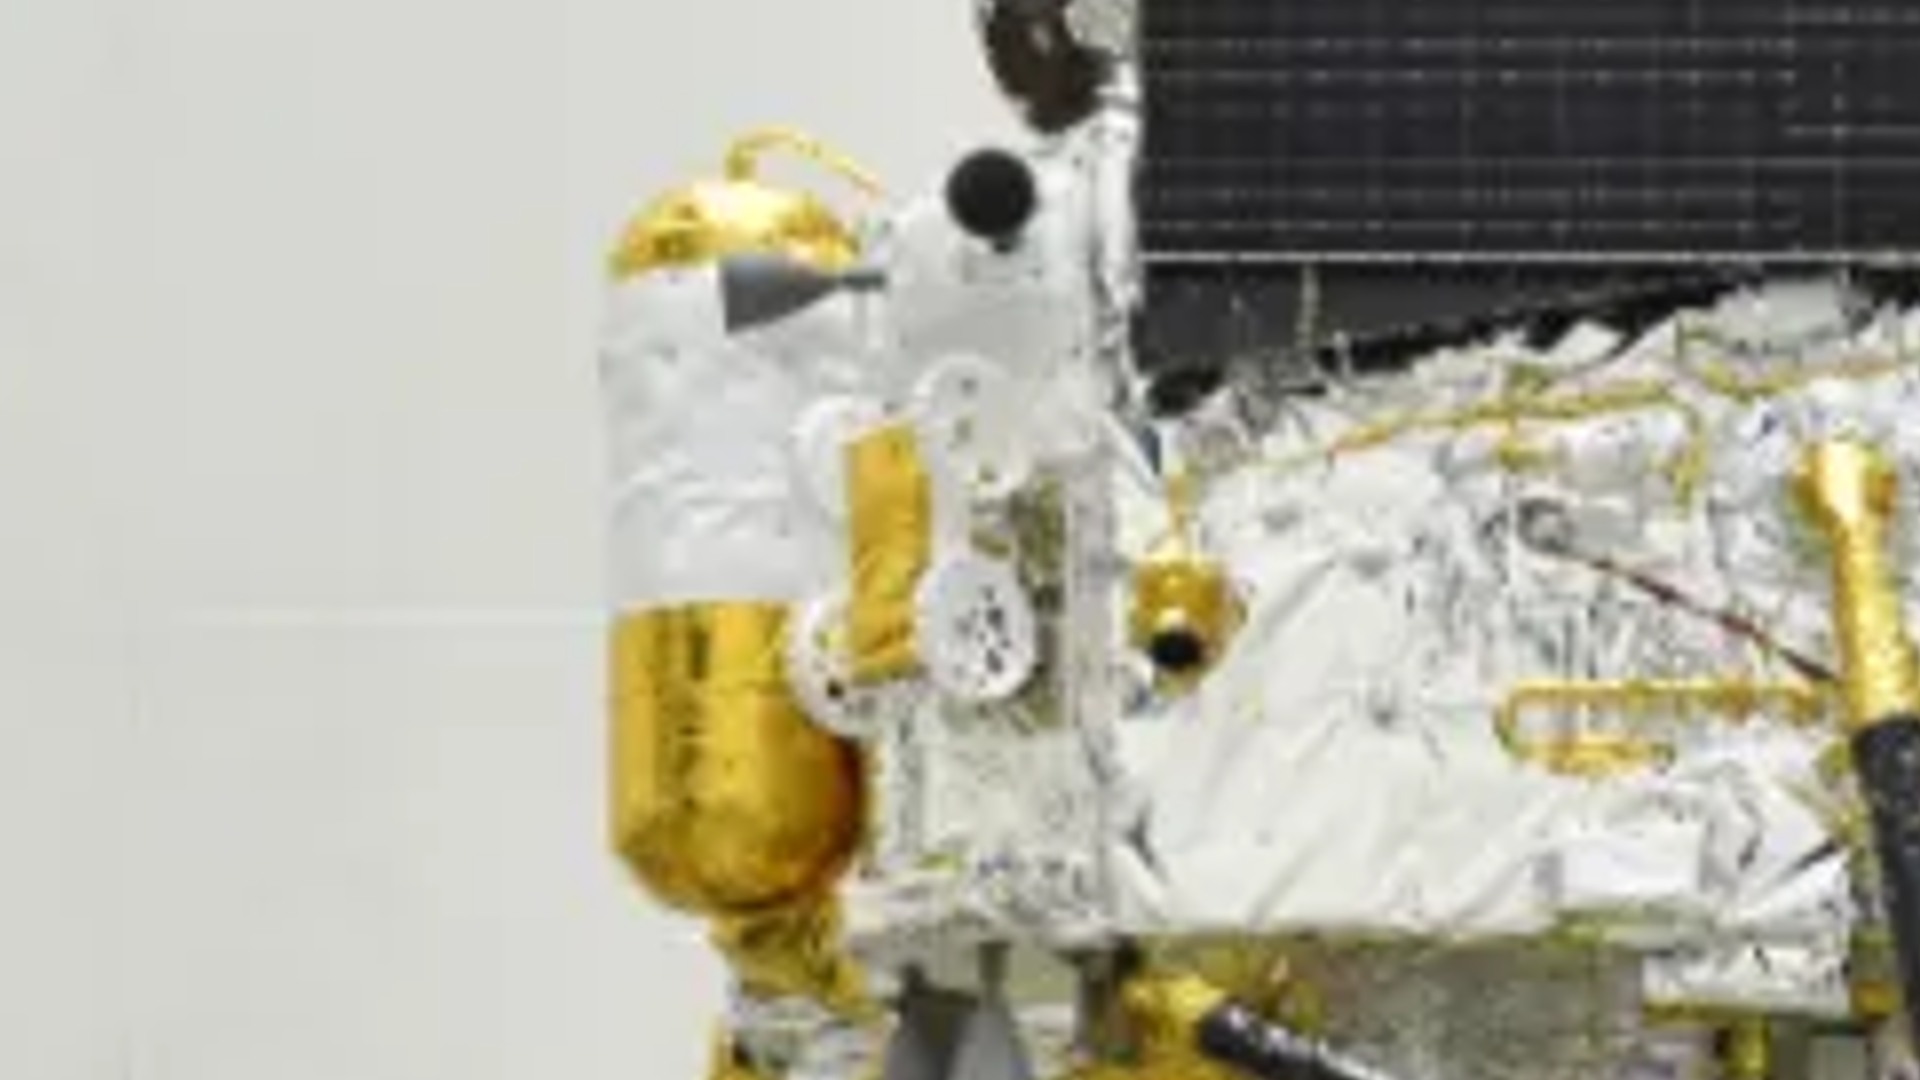 A close up of a tiny gold and white moon rover on the side of a Chinese spacecraft.